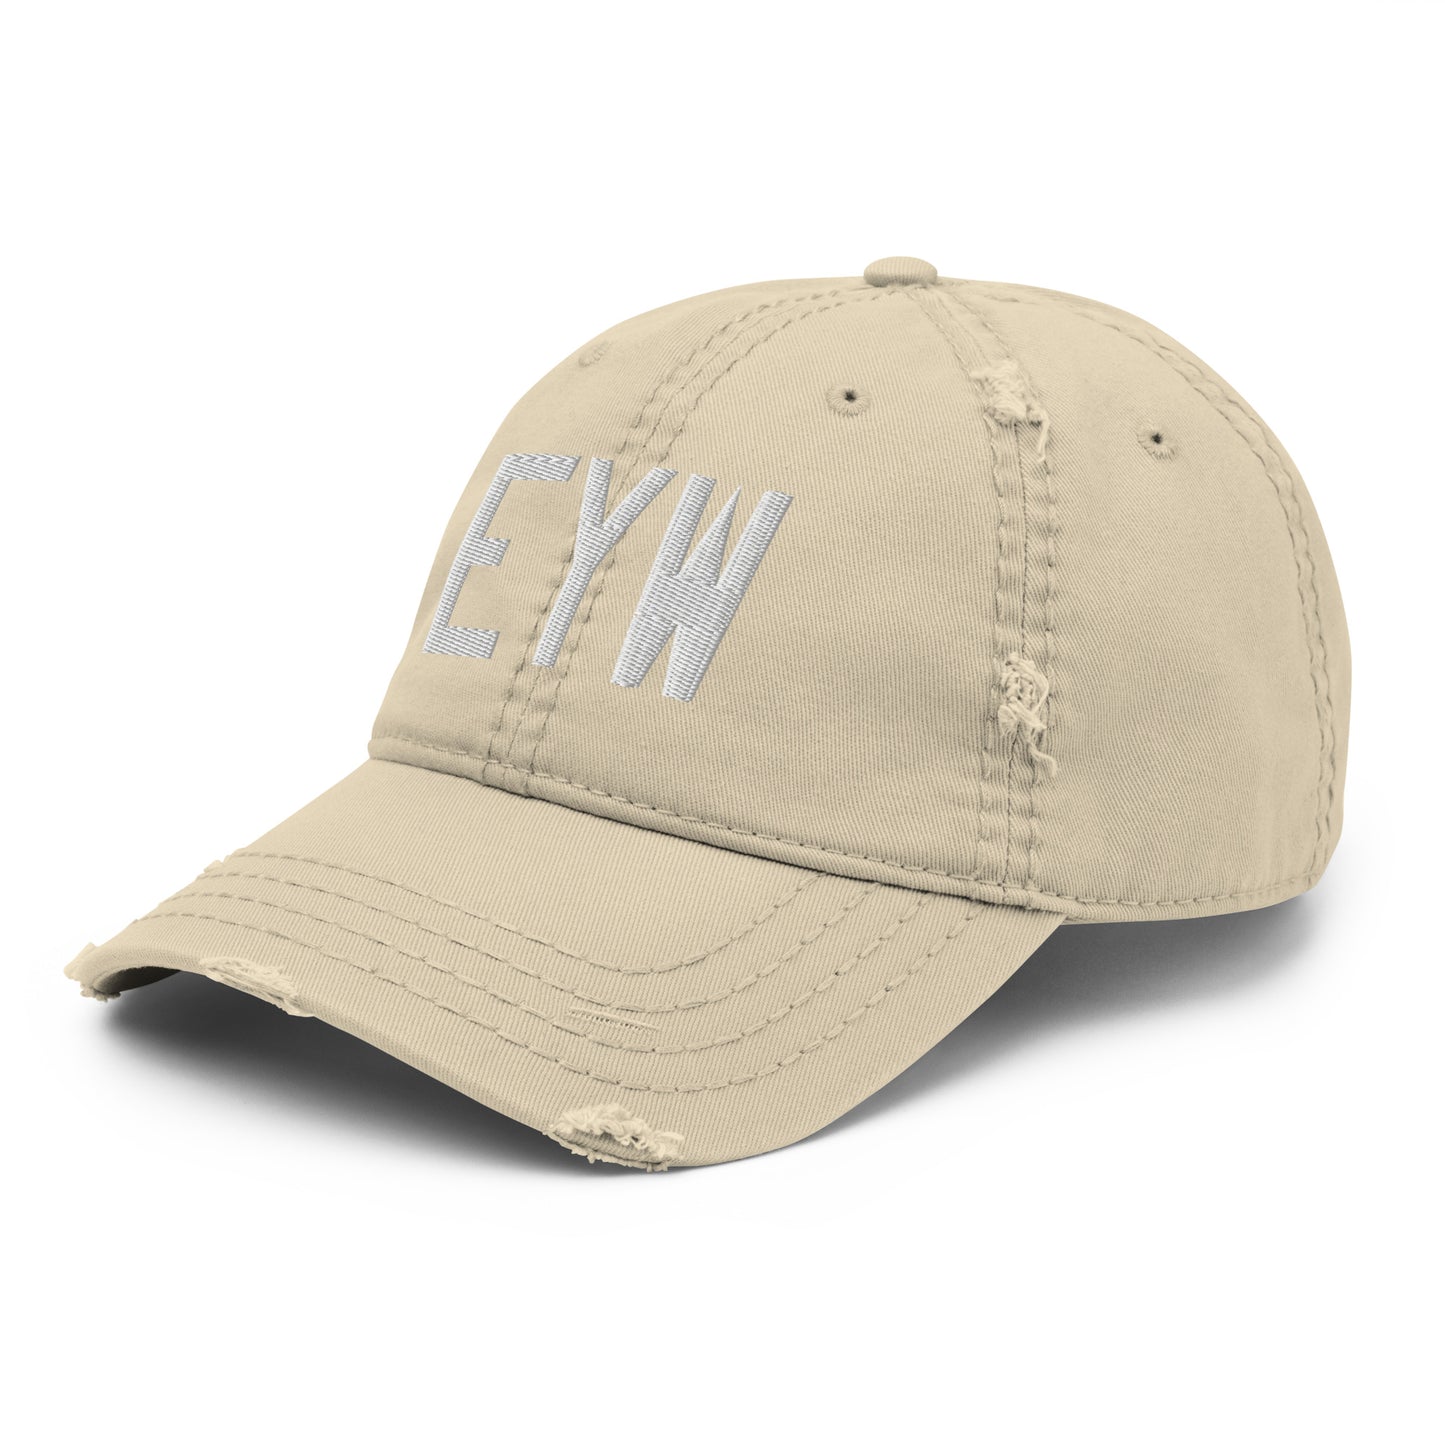 Airport Code Distressed Hat - White • EYW Key West • YHM Designs - Image 19